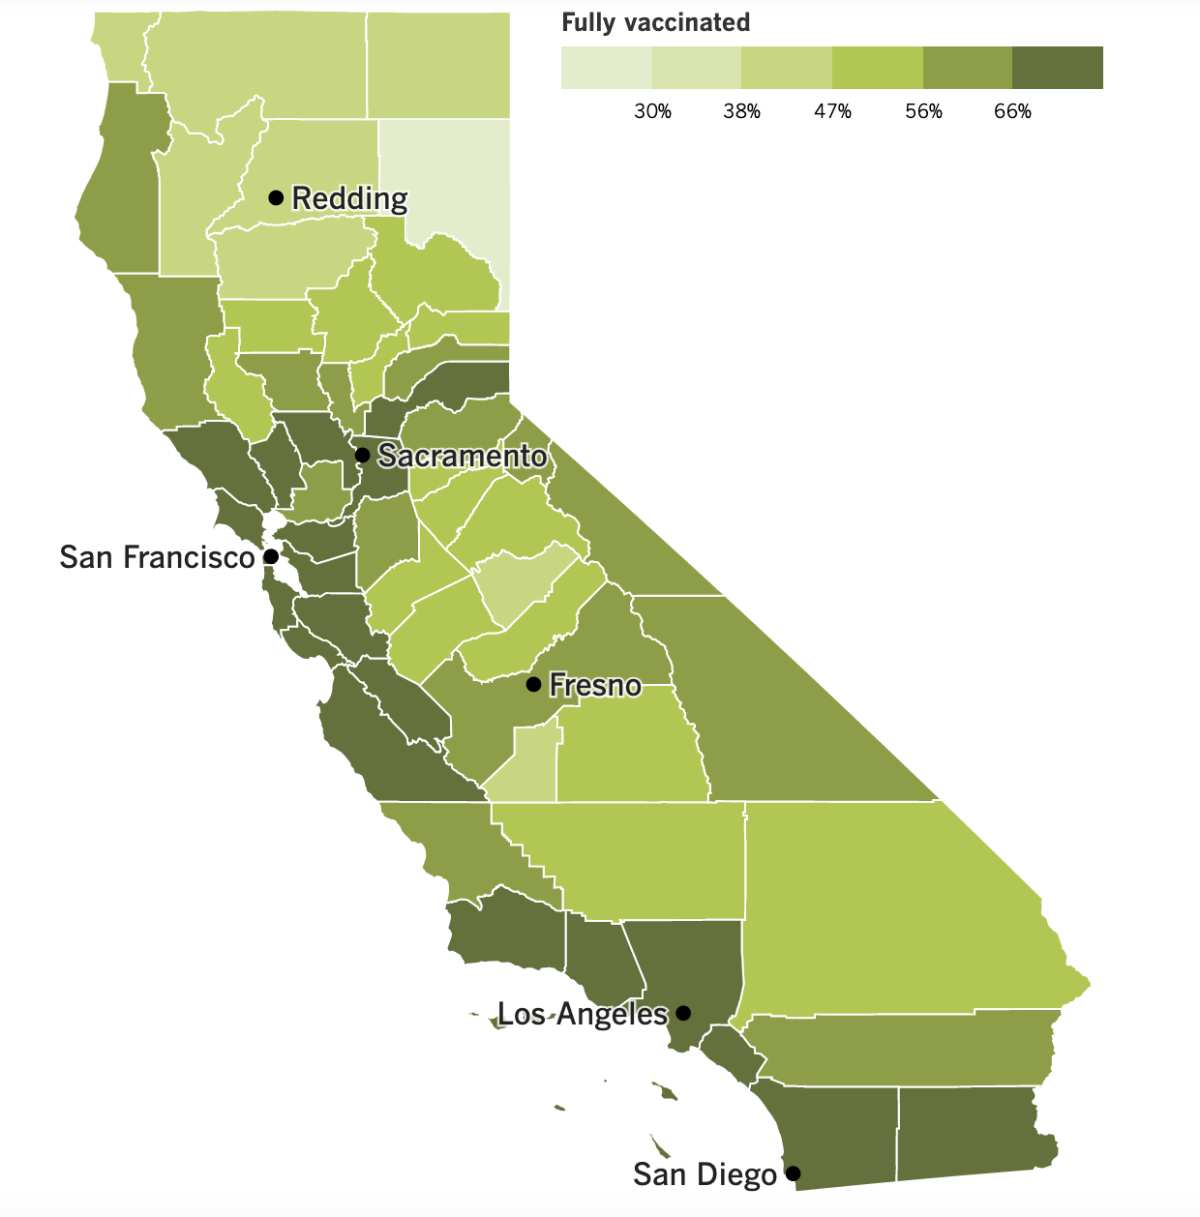 A map showing California's vaccination progress by county as of Jan. 25, 2022.